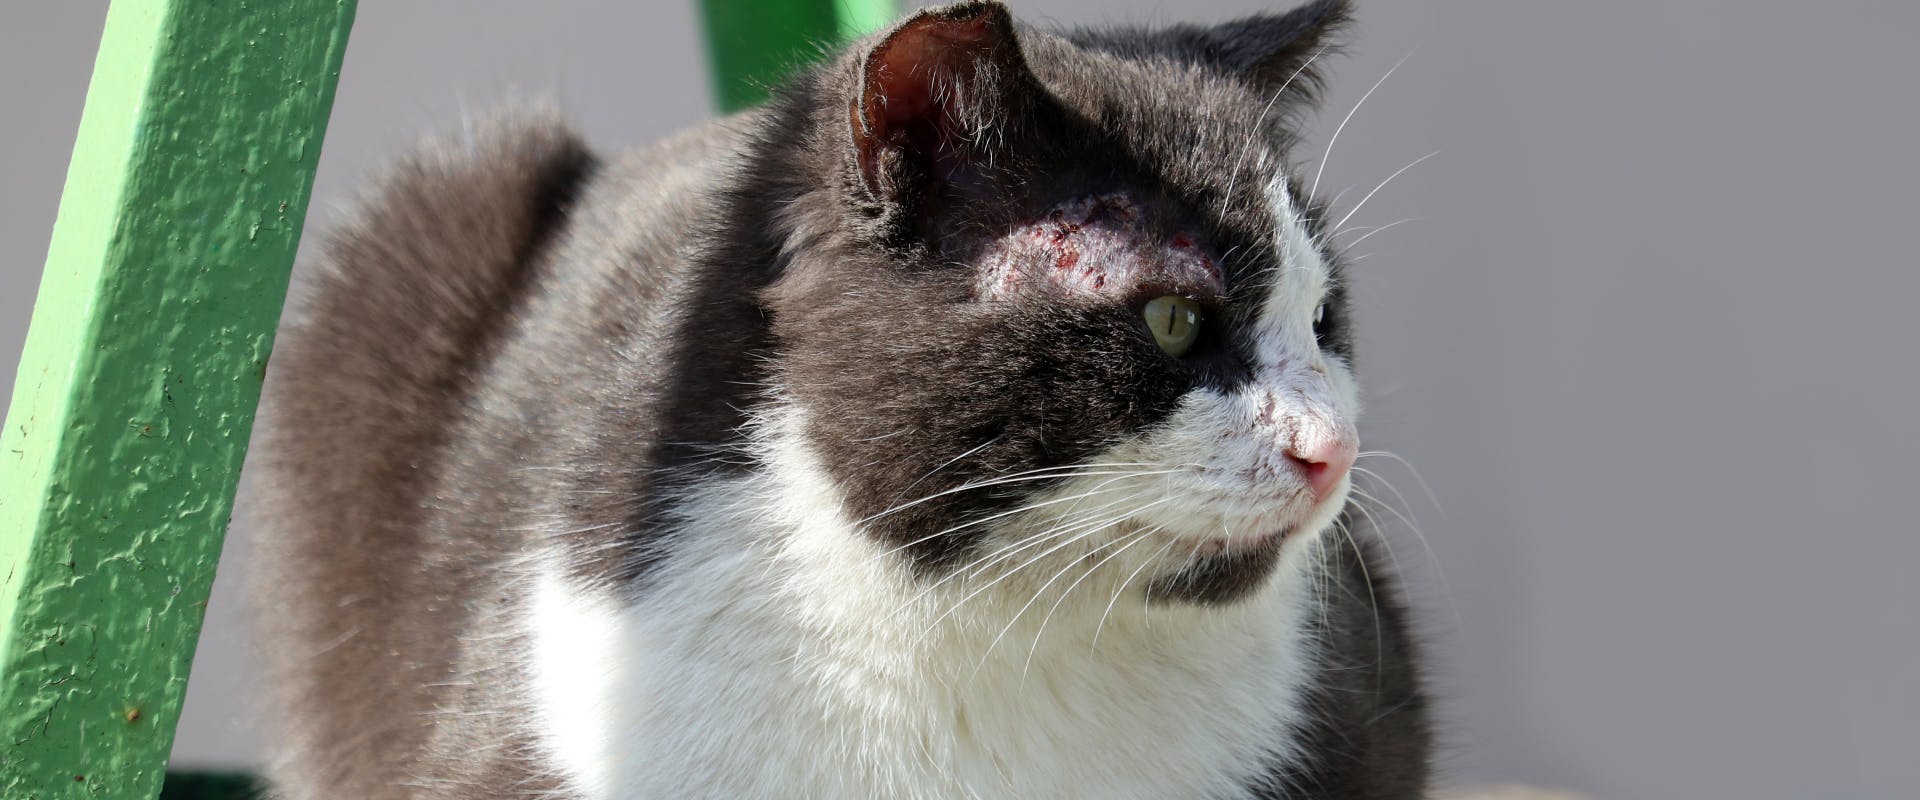 a crouching gray and white cat with a patch of mange on its head